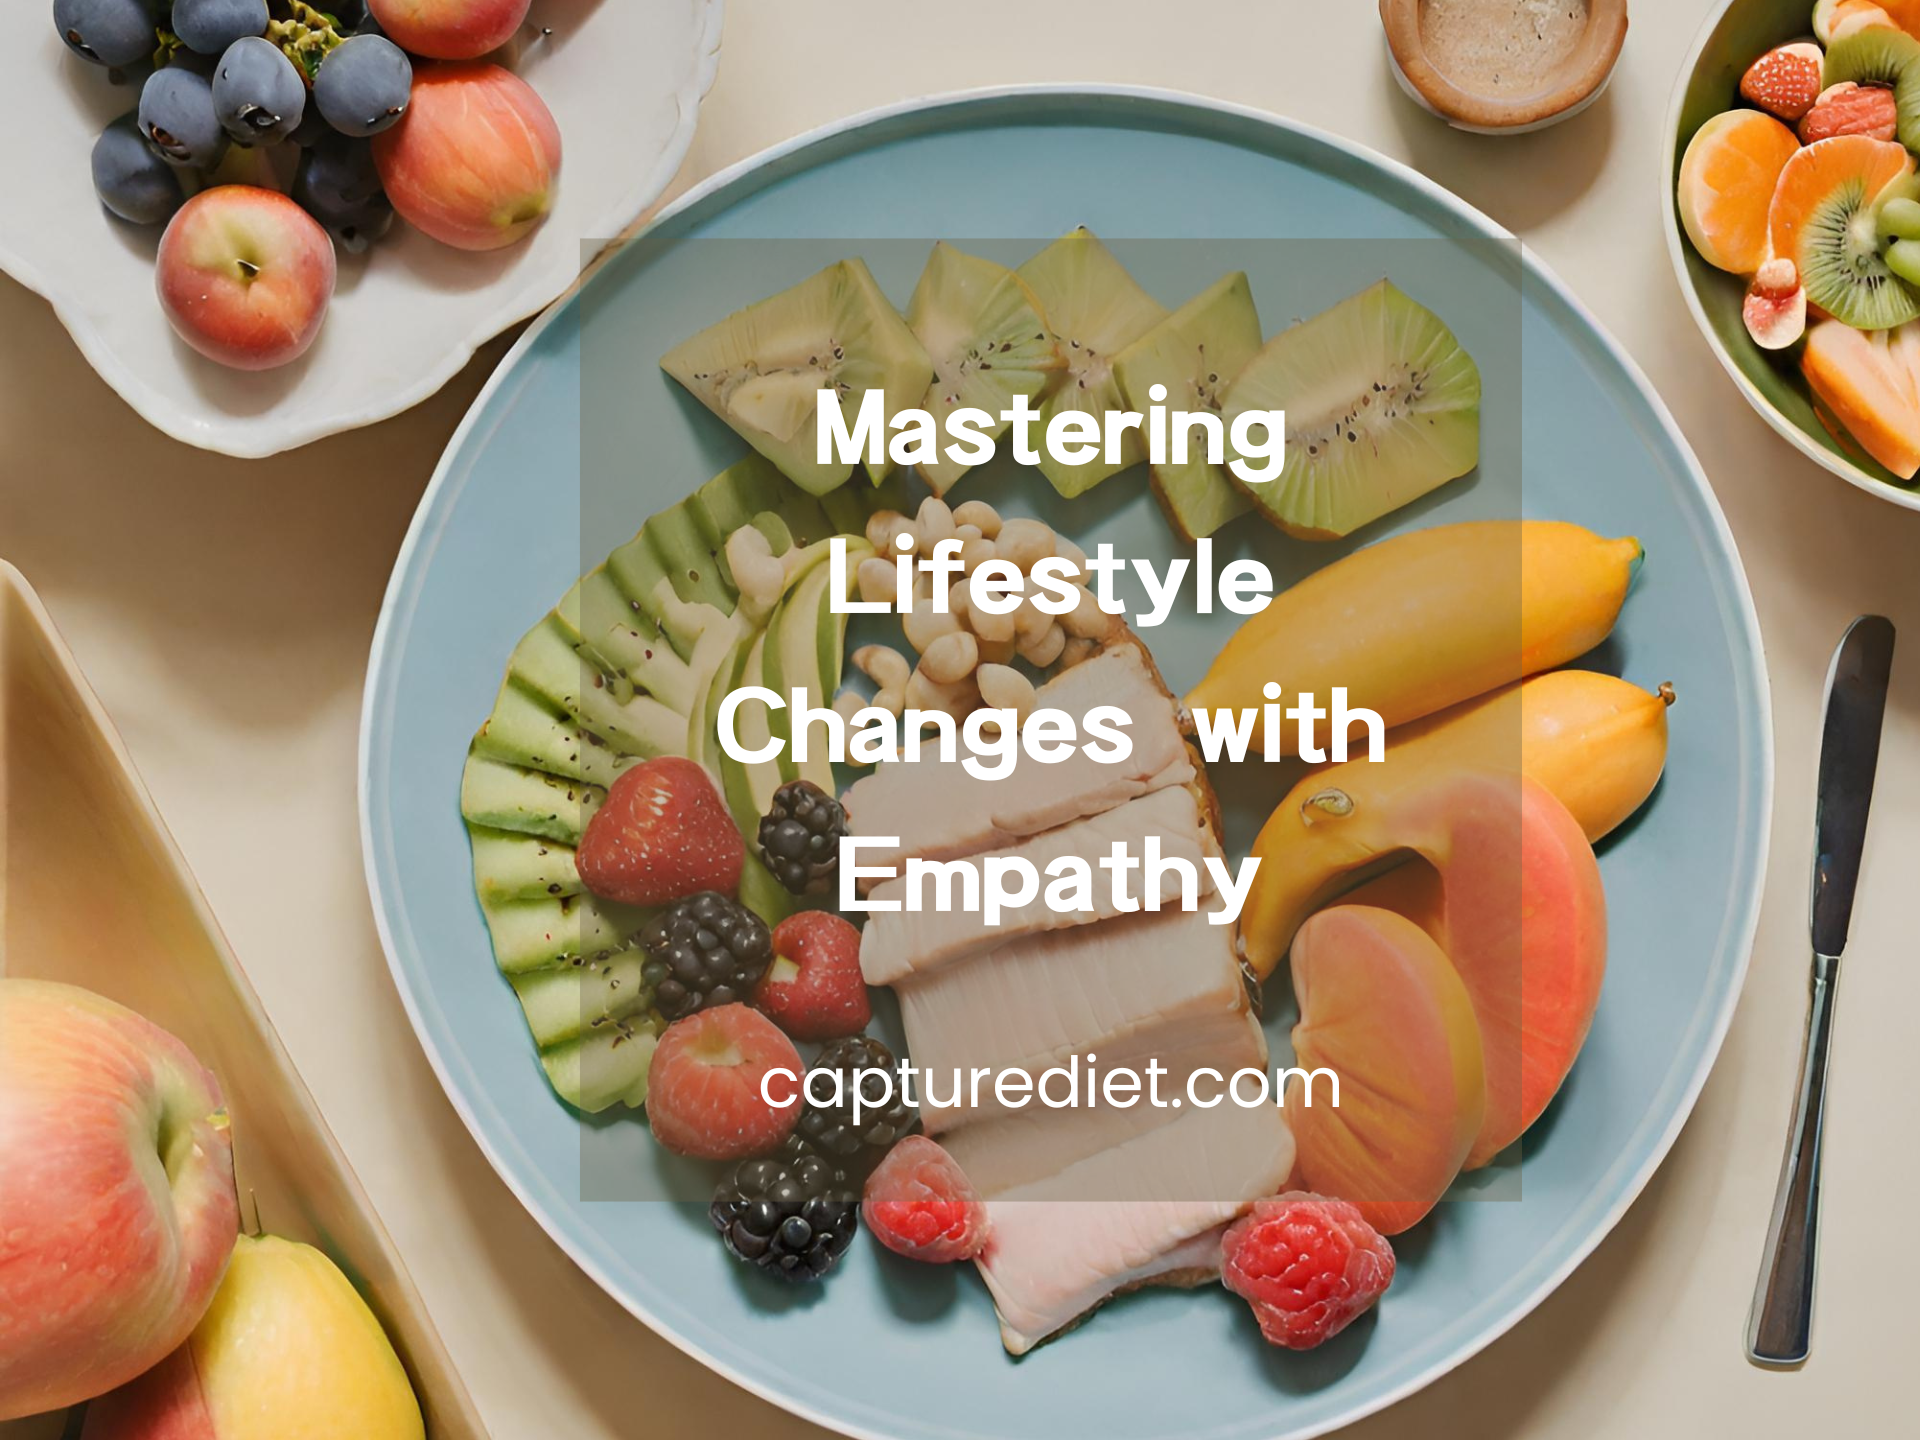 "Revolutionize Weight Loss: Mastering Lifestyle Changes with Empathy"